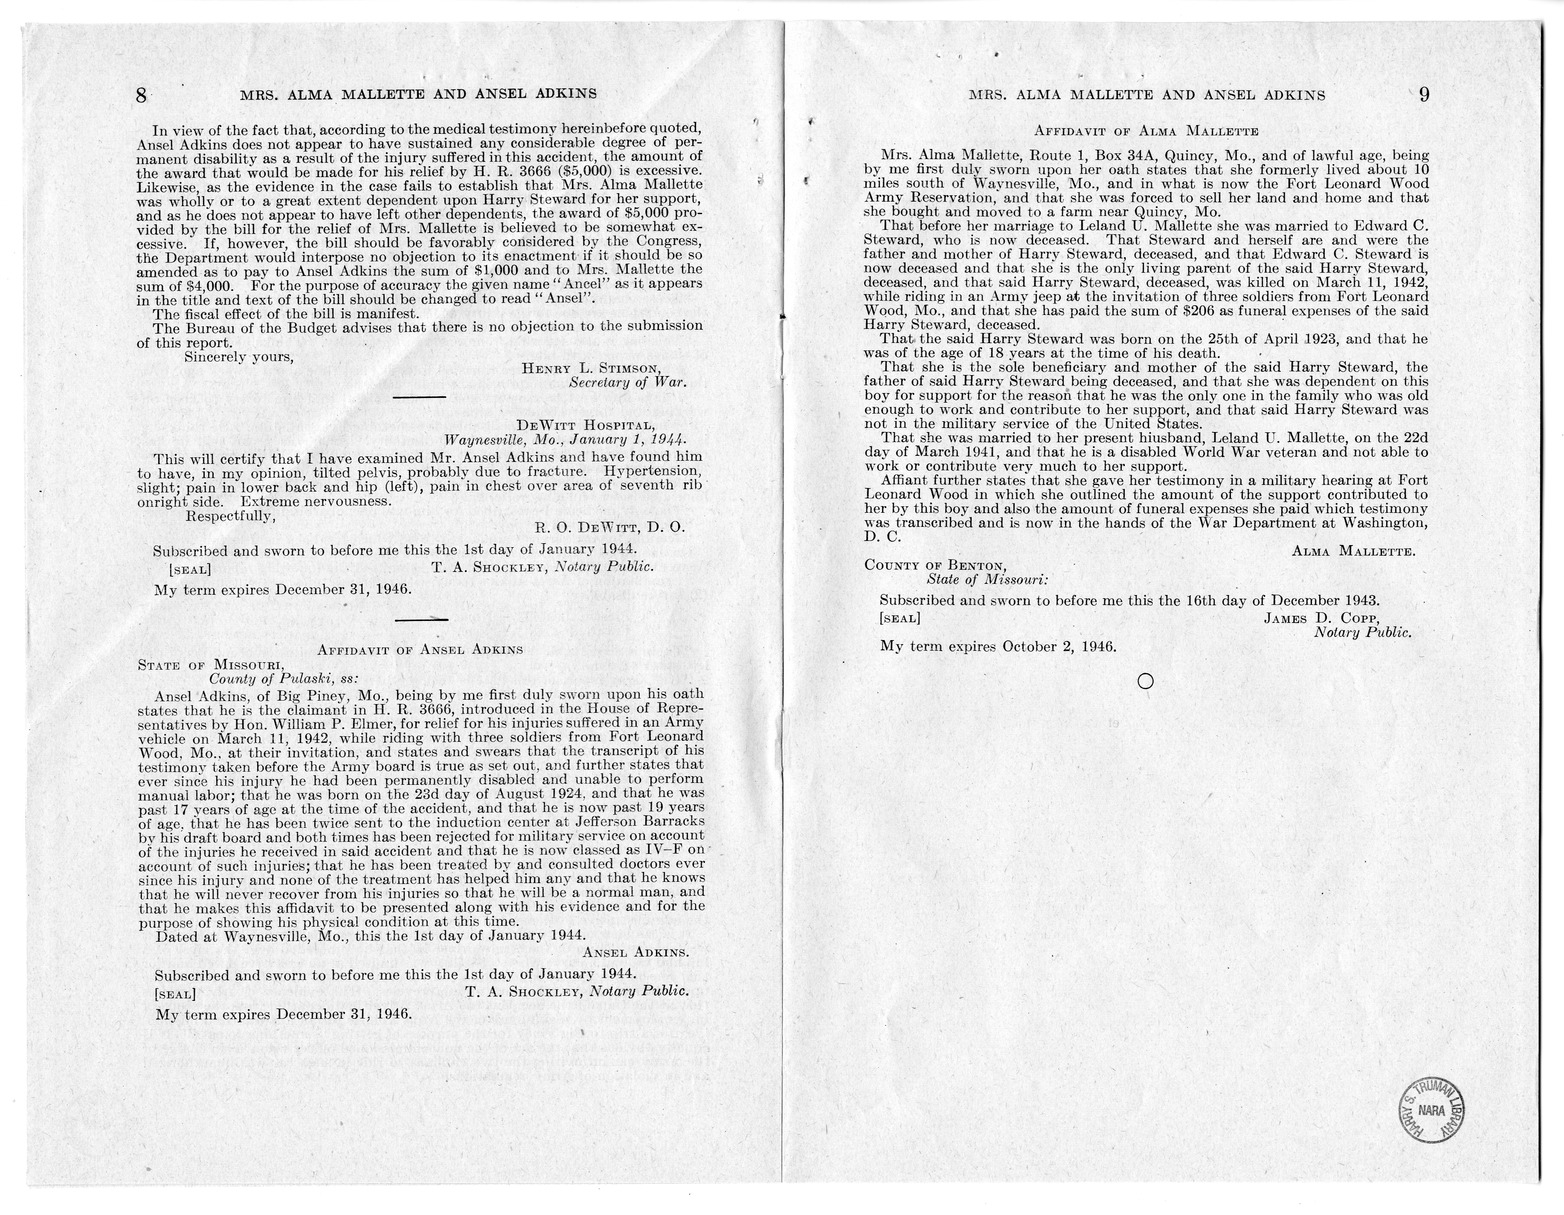 Memorandum from Frederick J. Bailey to M. C. Latta, H.R. 1558, For the Relief of Mrs. Alma Mallette and Ansel Adkins, with Attachments